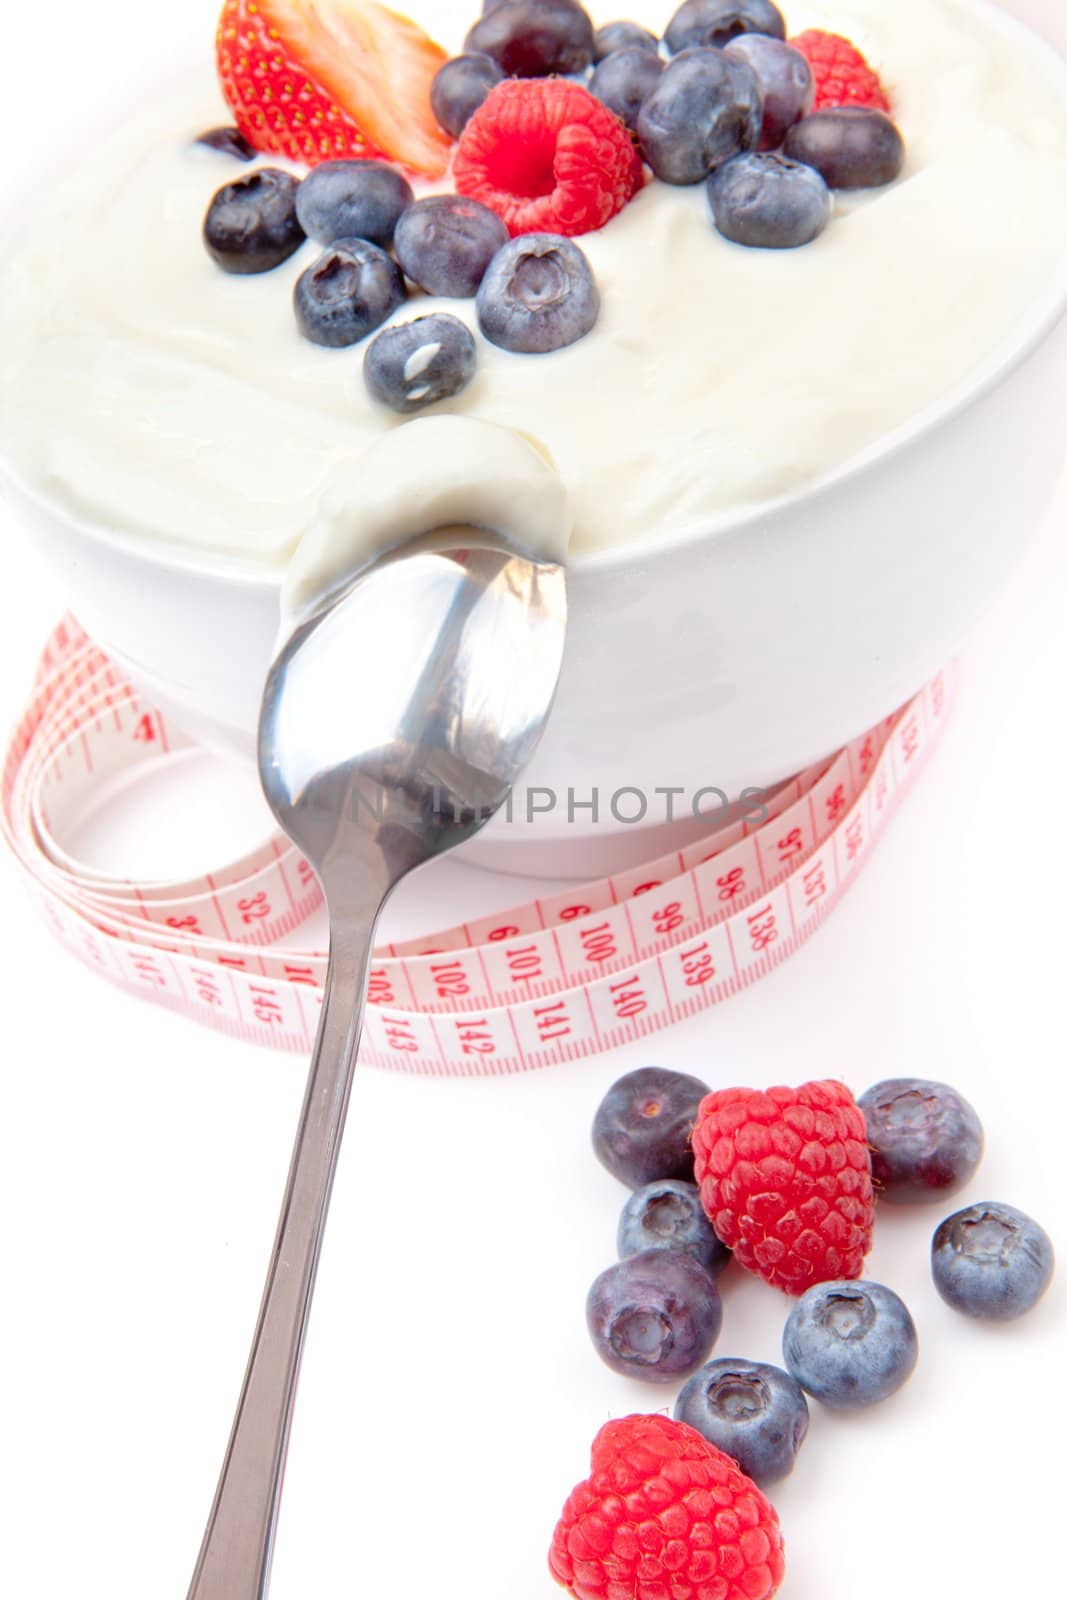 Berries cream and spoon with a tape measure  against a white background